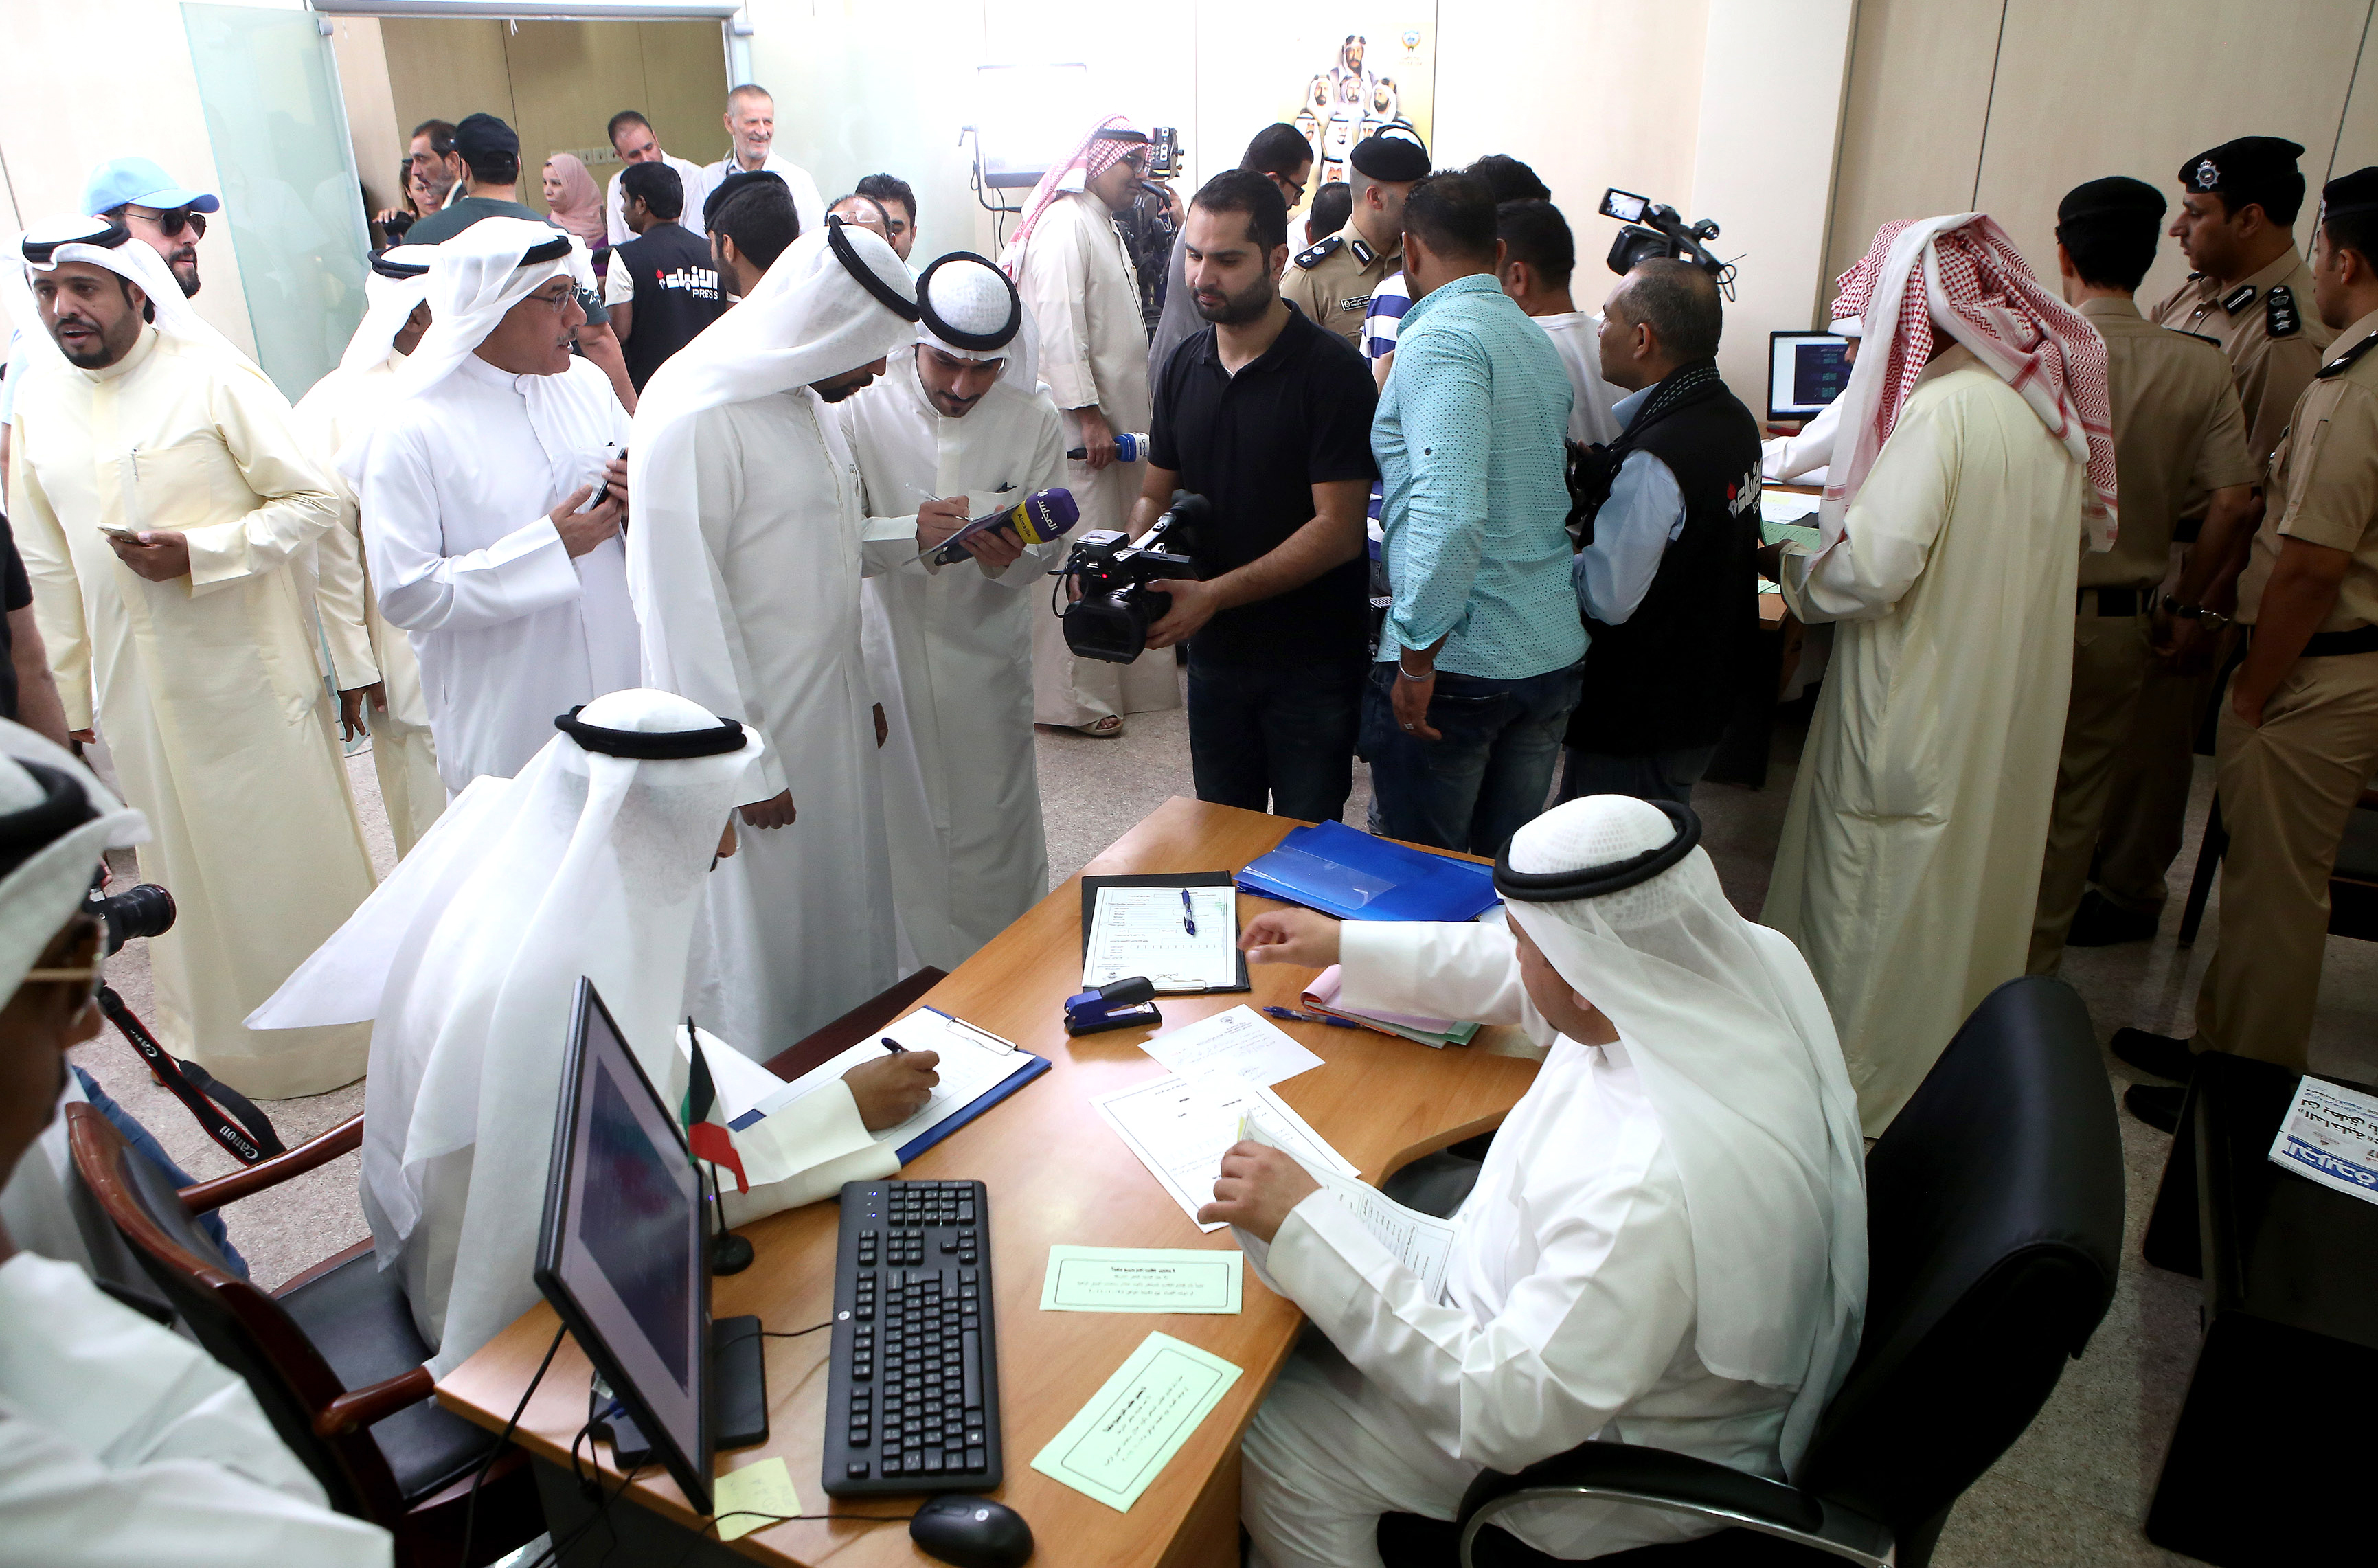 Kuwaiti candidates register for the upcoming parliamentary election in Kuwait City, on October 19, 2016. Kuwait will hold snap elections on November 26, the government said on October 17, 2016 a day after the oil-rich Gulf state ruler dissolved parliament following a dispute over hiking petrol prices. / AFP PHOTO / Yasser Al-Zayyat